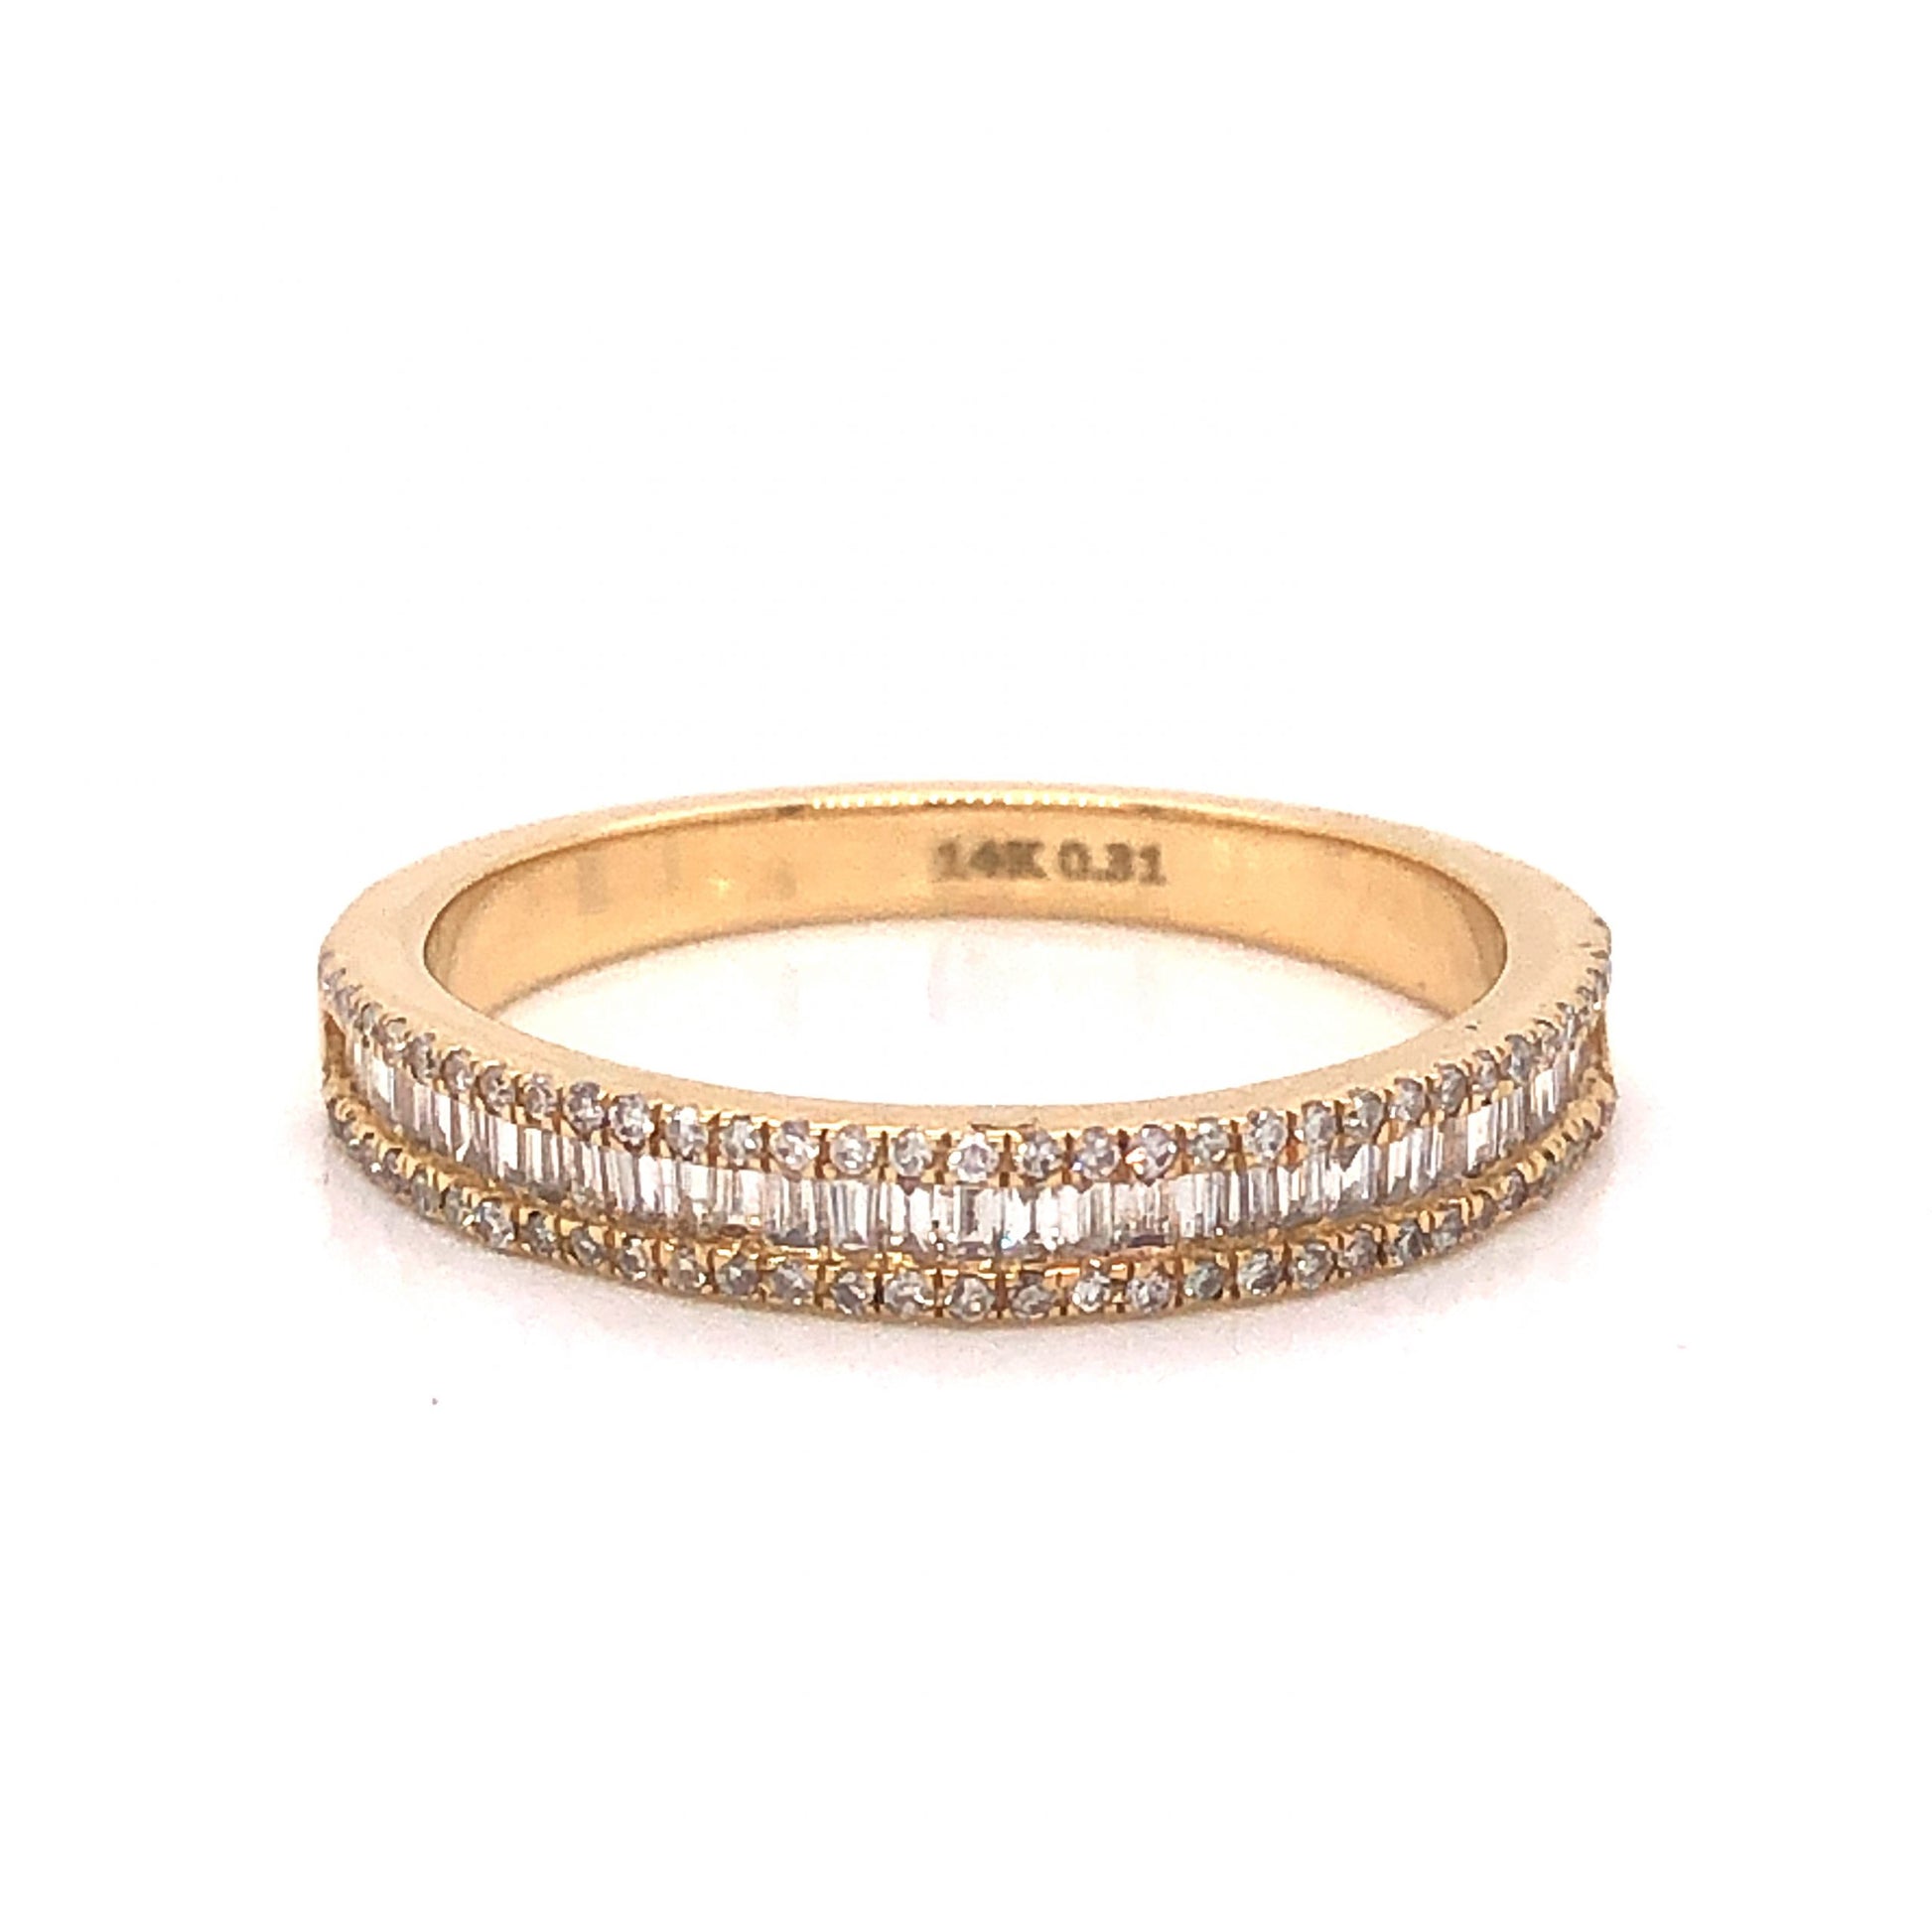 Baguette & Round Pave Diamond Band in 14k Yellow GoldComposition: 14 Karat Yellow GoldRing Size: 6Total Diamond Weight: .31 ctTotal Gram Weight: 2.2 gInscription: 14k 0.31